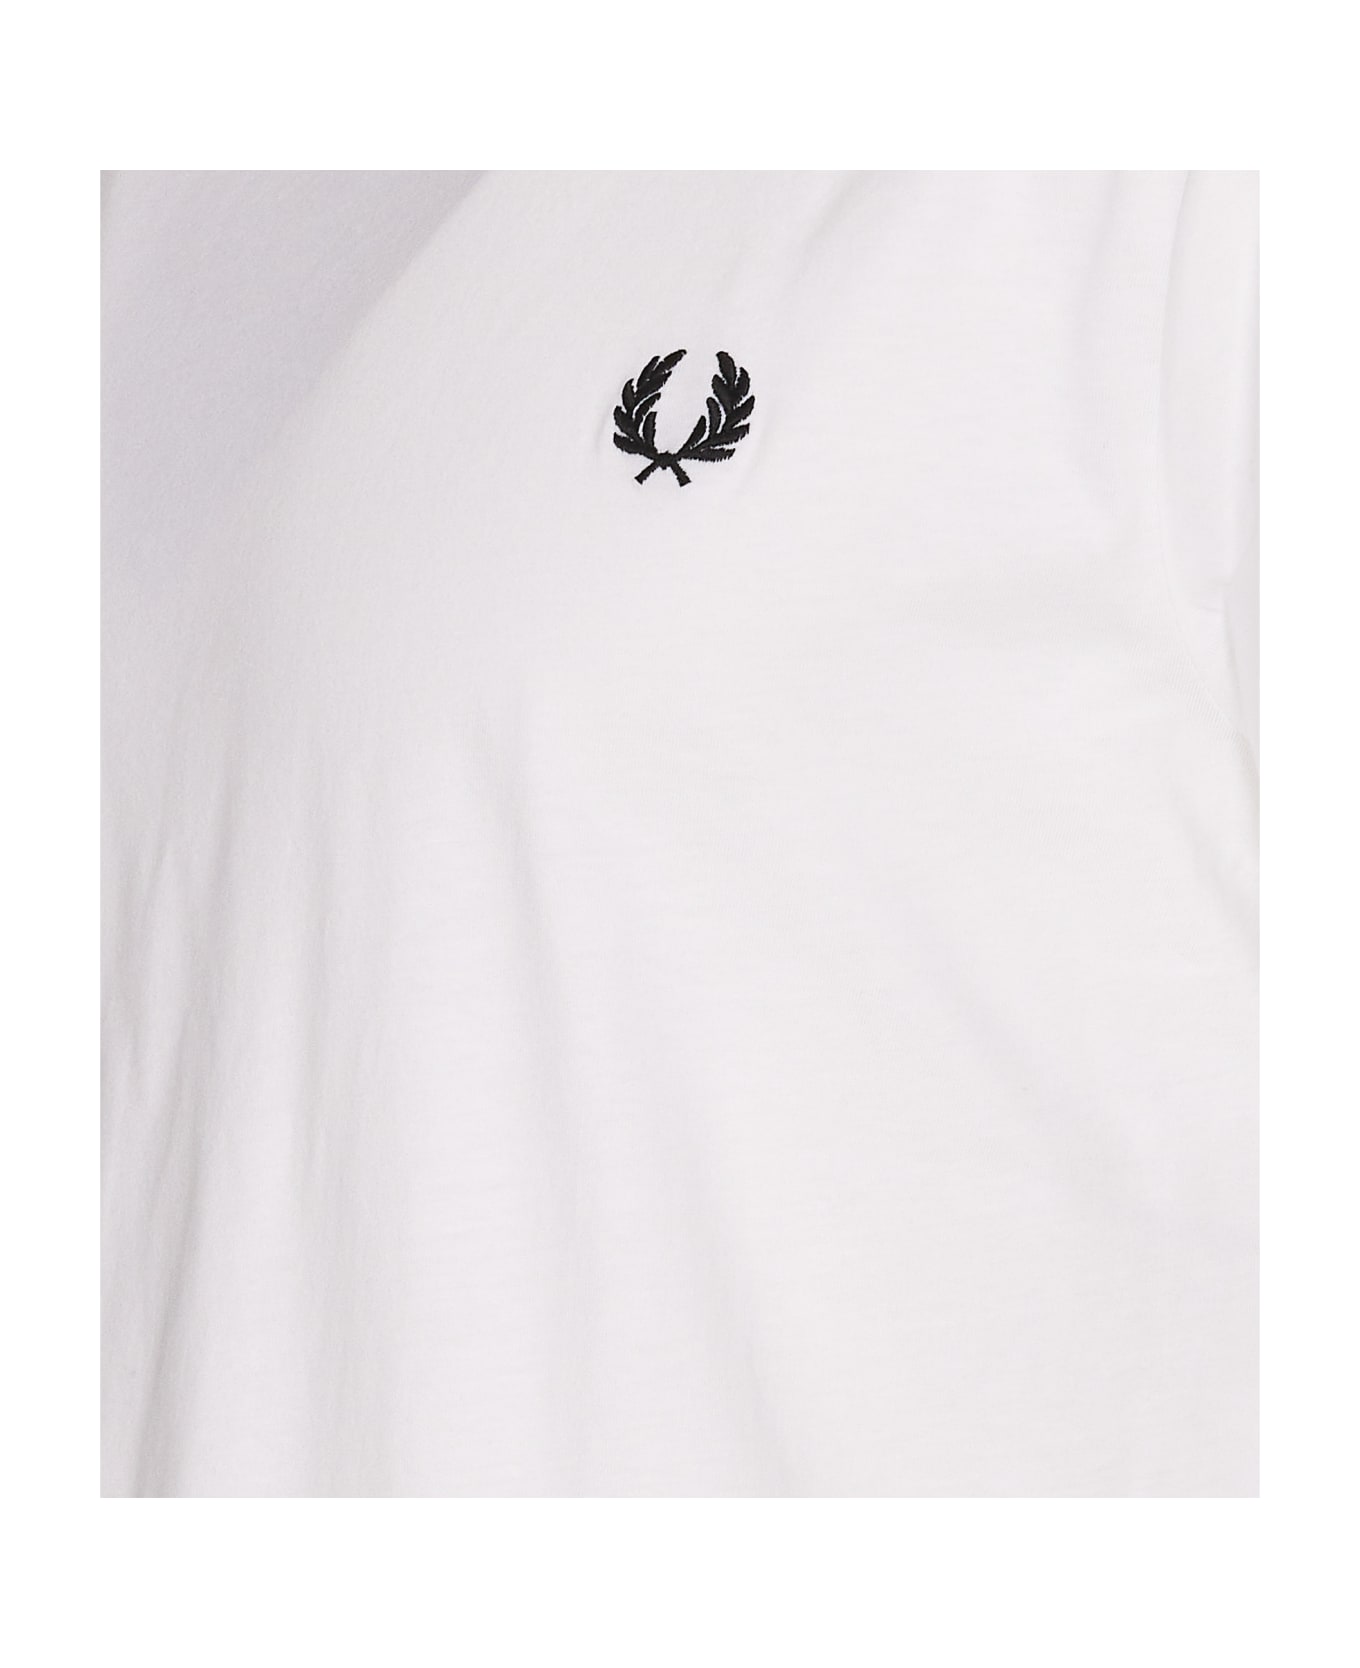 Fred Perry Twin T-shirt - White シャツ